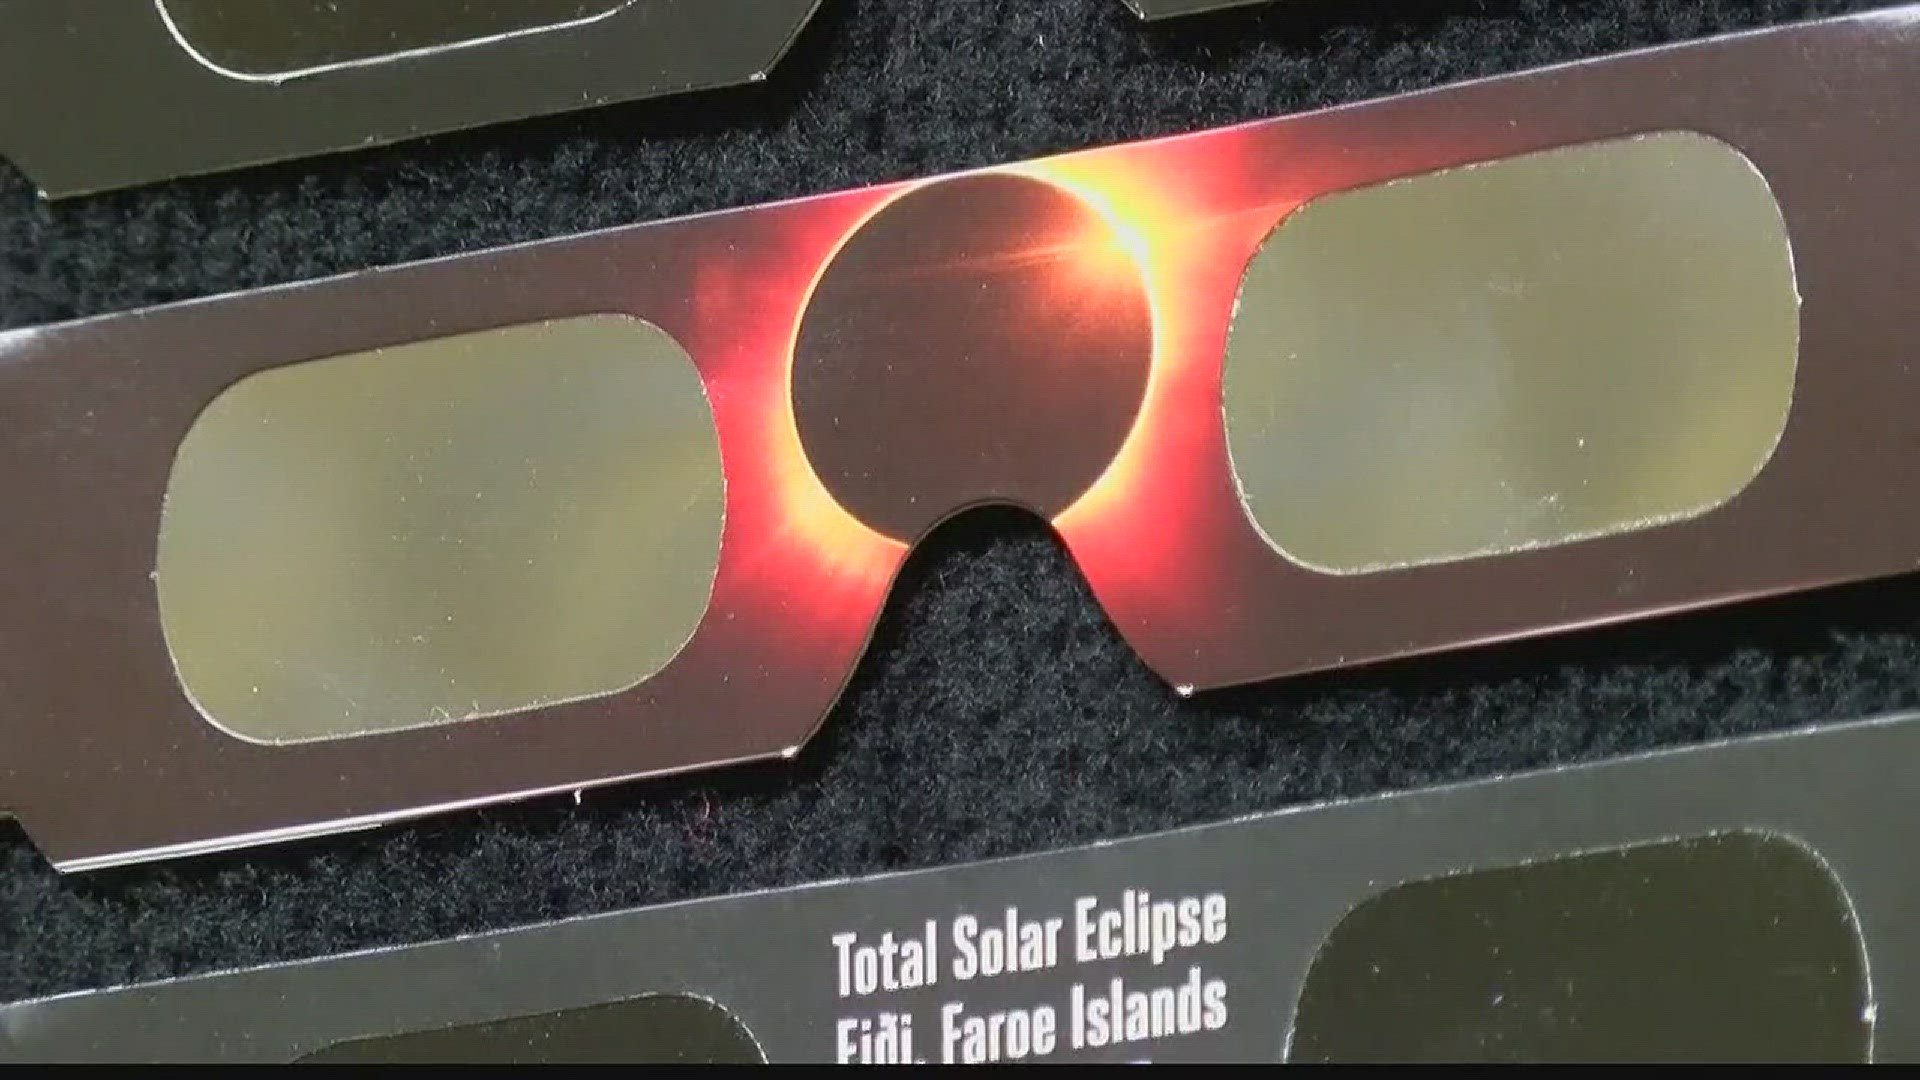 123 SOLARWEAR Solar Eclipse Glasses - CE and ISO Certified Safe Shades